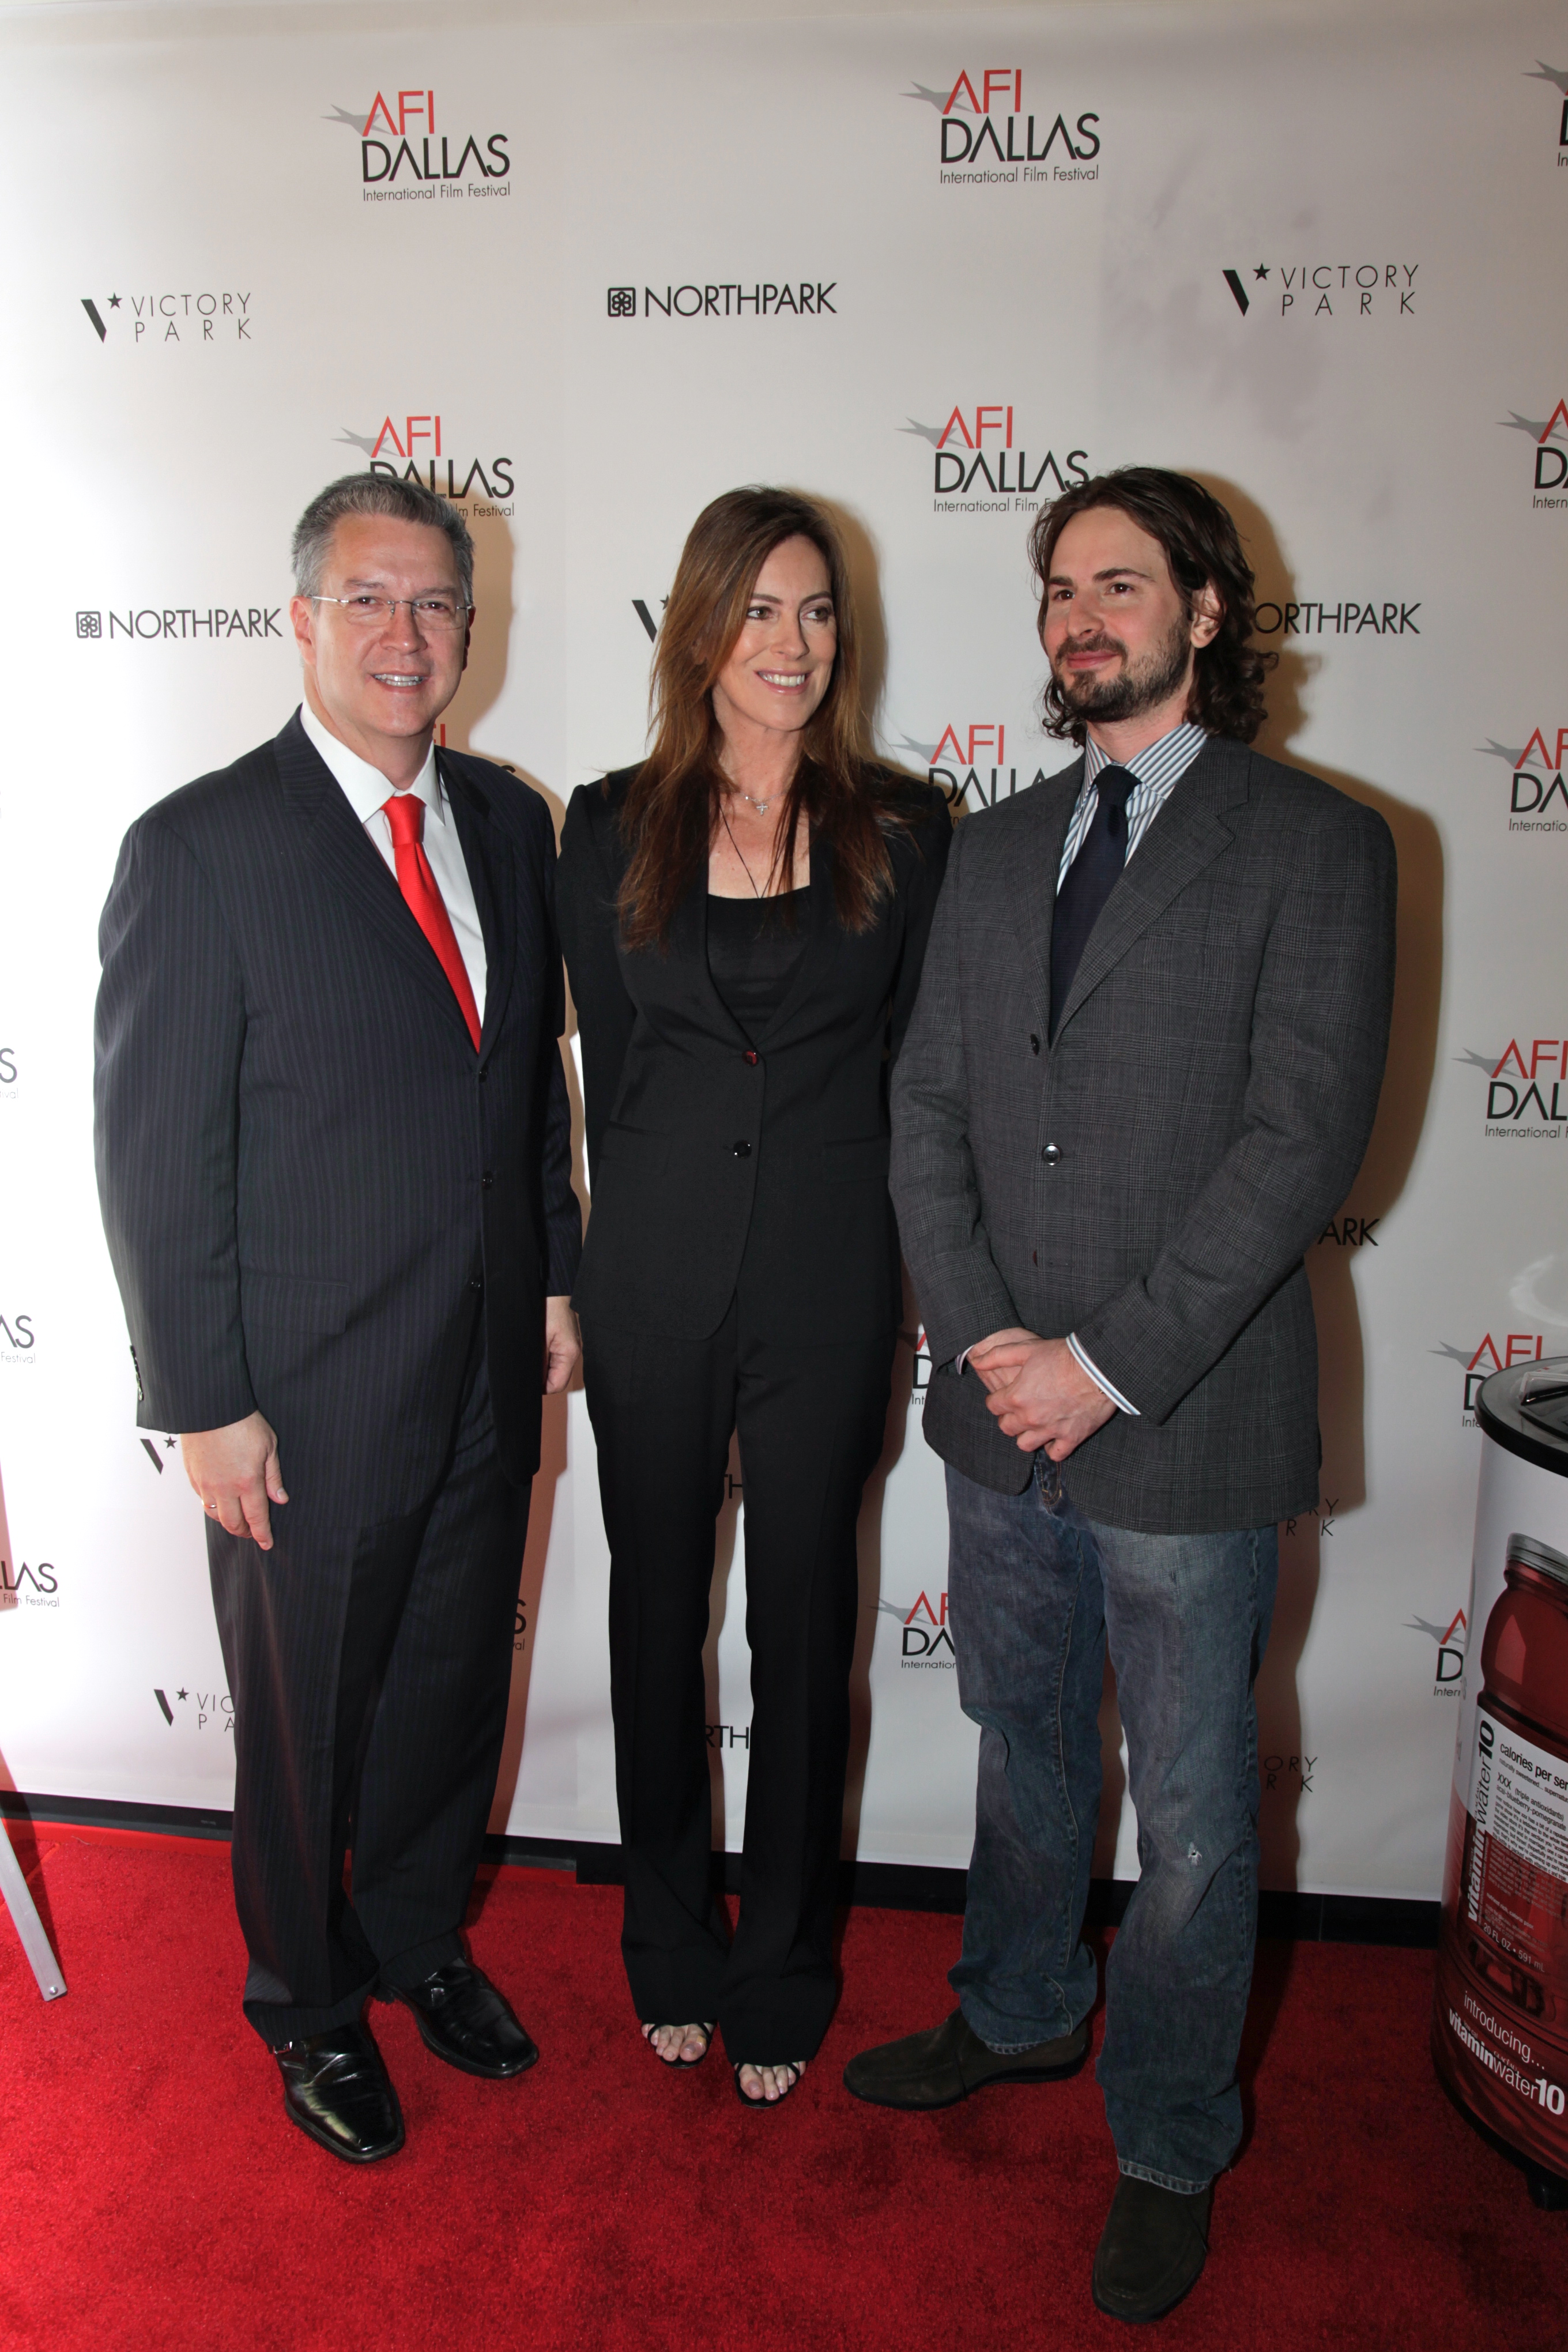 Michael Cain, Kathryn Bigelow and Mark Boal April 2009, AFI DALLAS Premiere of THE HURT LOCKER and Presentation of the Dallas Star Award to Kathryn Bigelow.